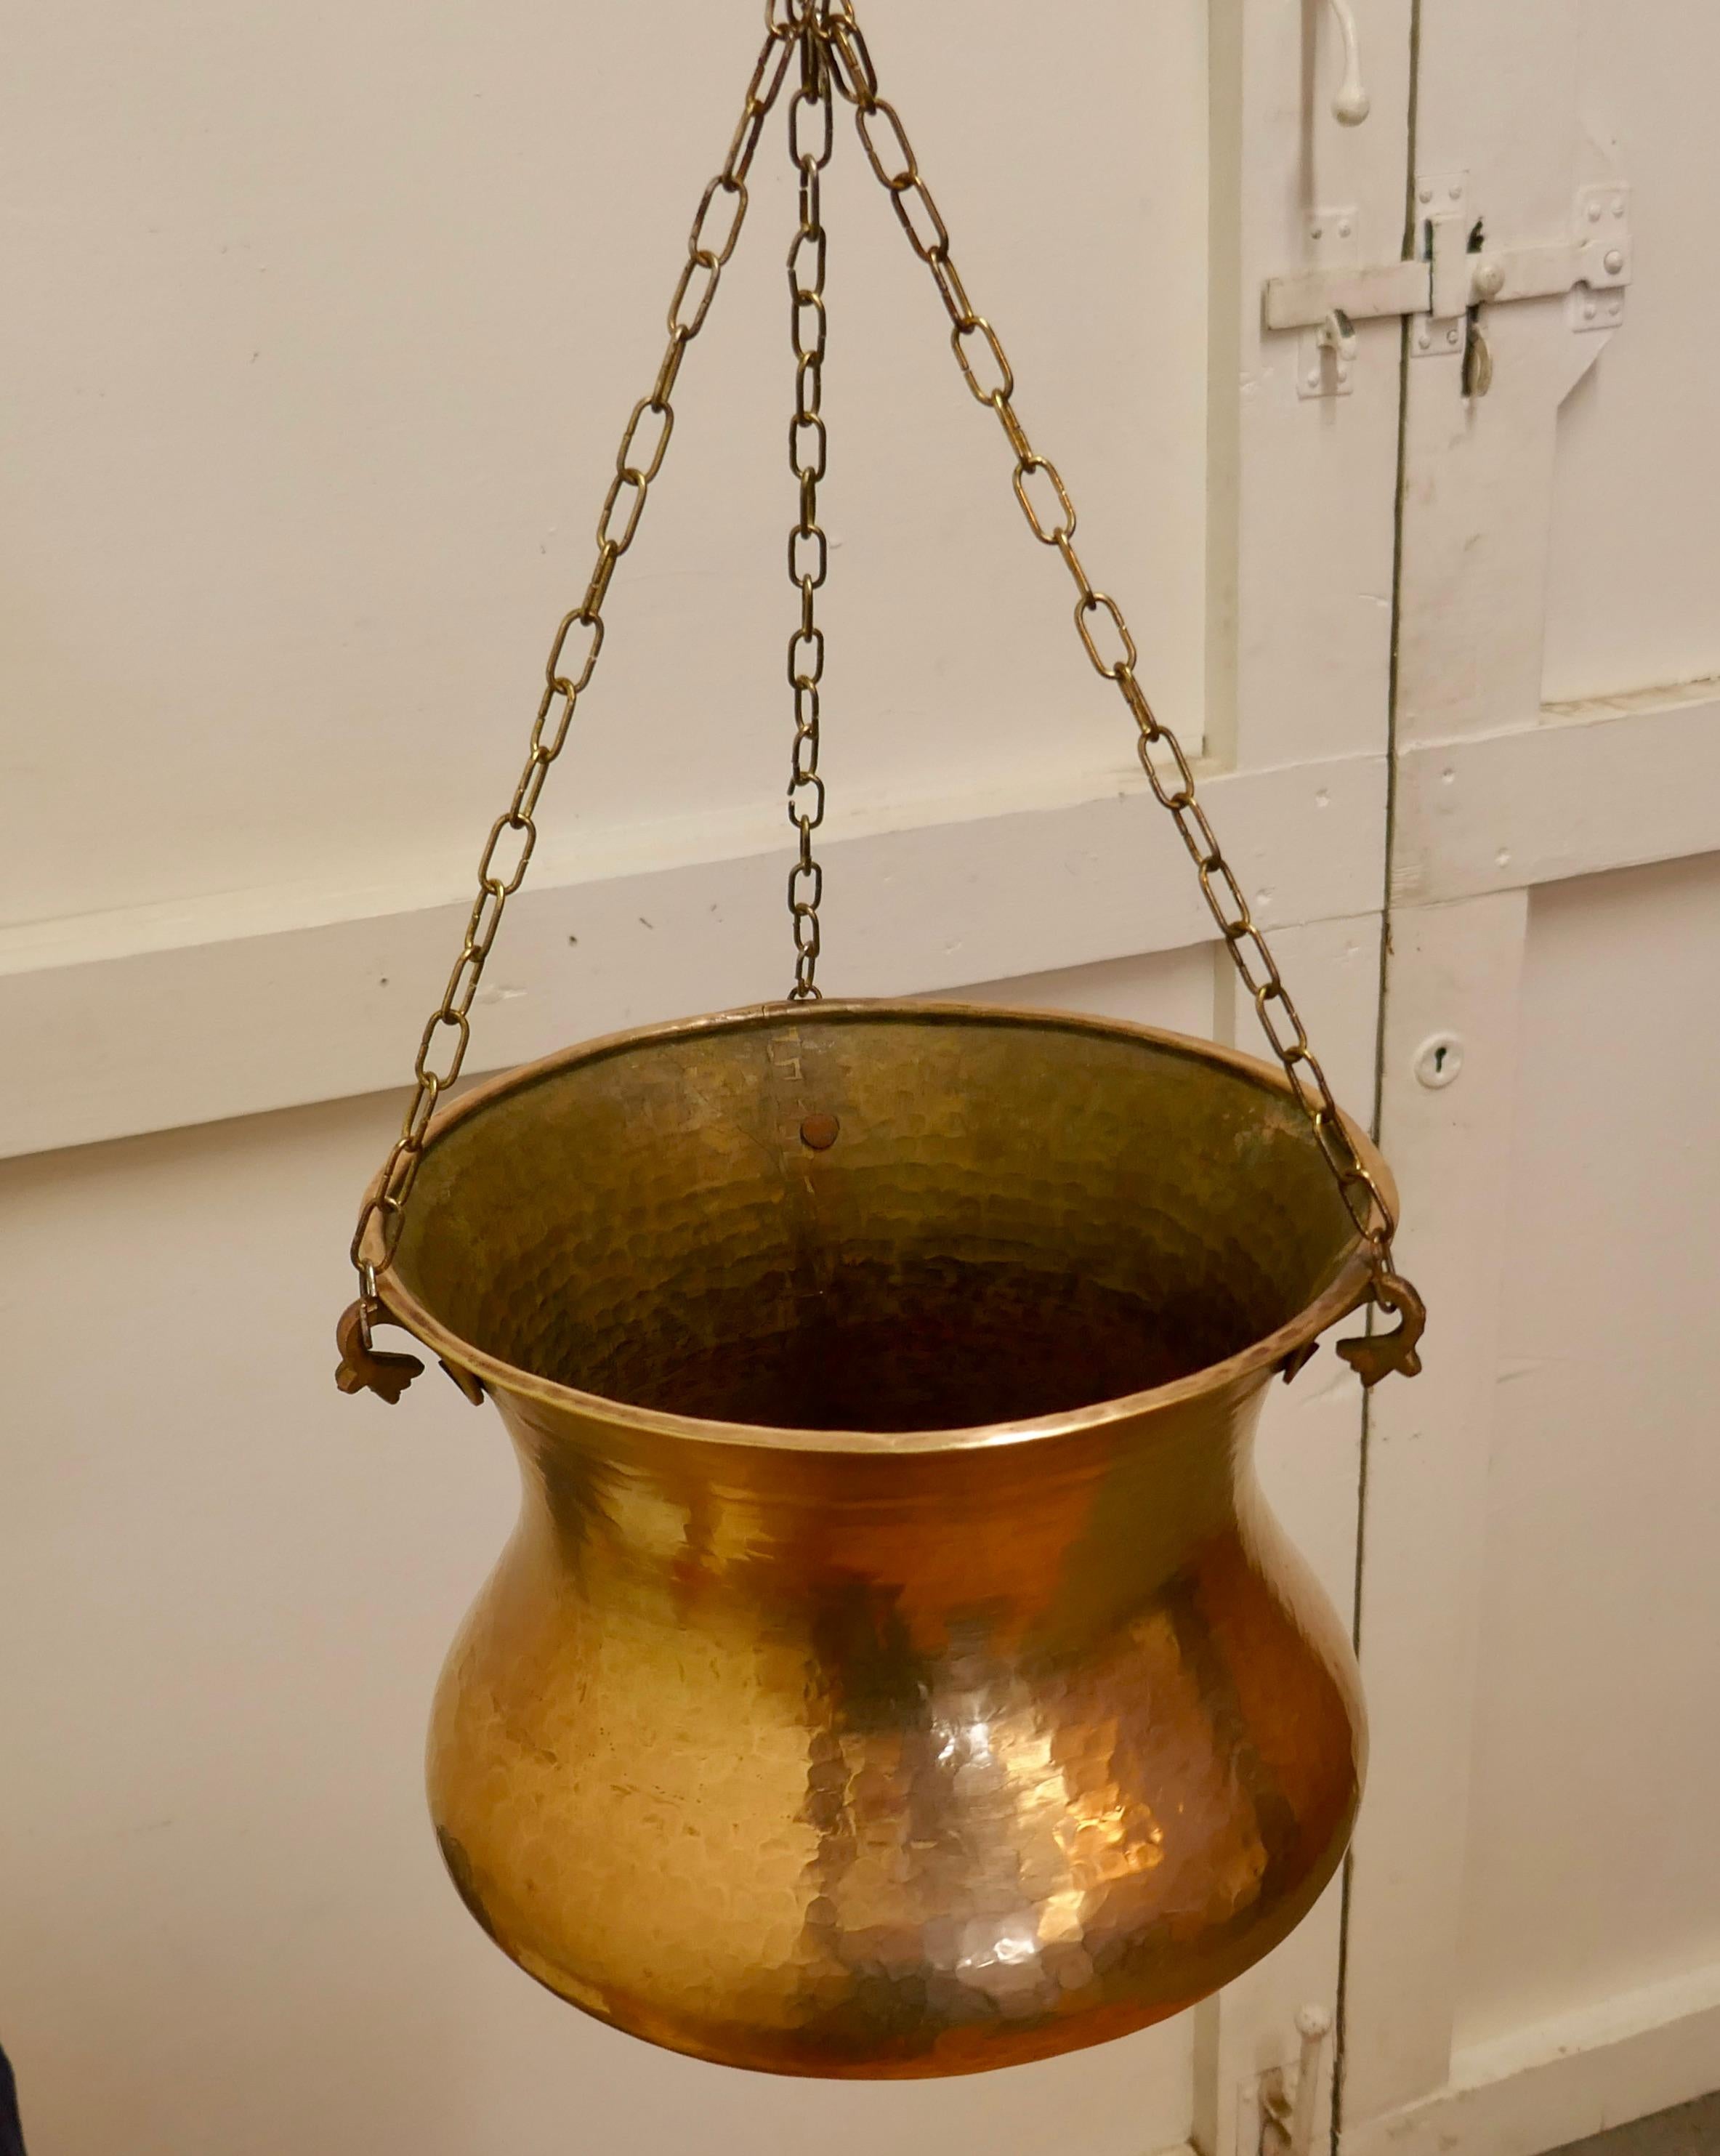 19th Century Hand Beaten Brass Cooking Pot, Cauldron 

This is a lovely early Cooking Pot, it is made in beaten brass, flaring out and rounded at the bottom 
The pot has a rolled top, and hangs on three chains
It is very sound with the usual